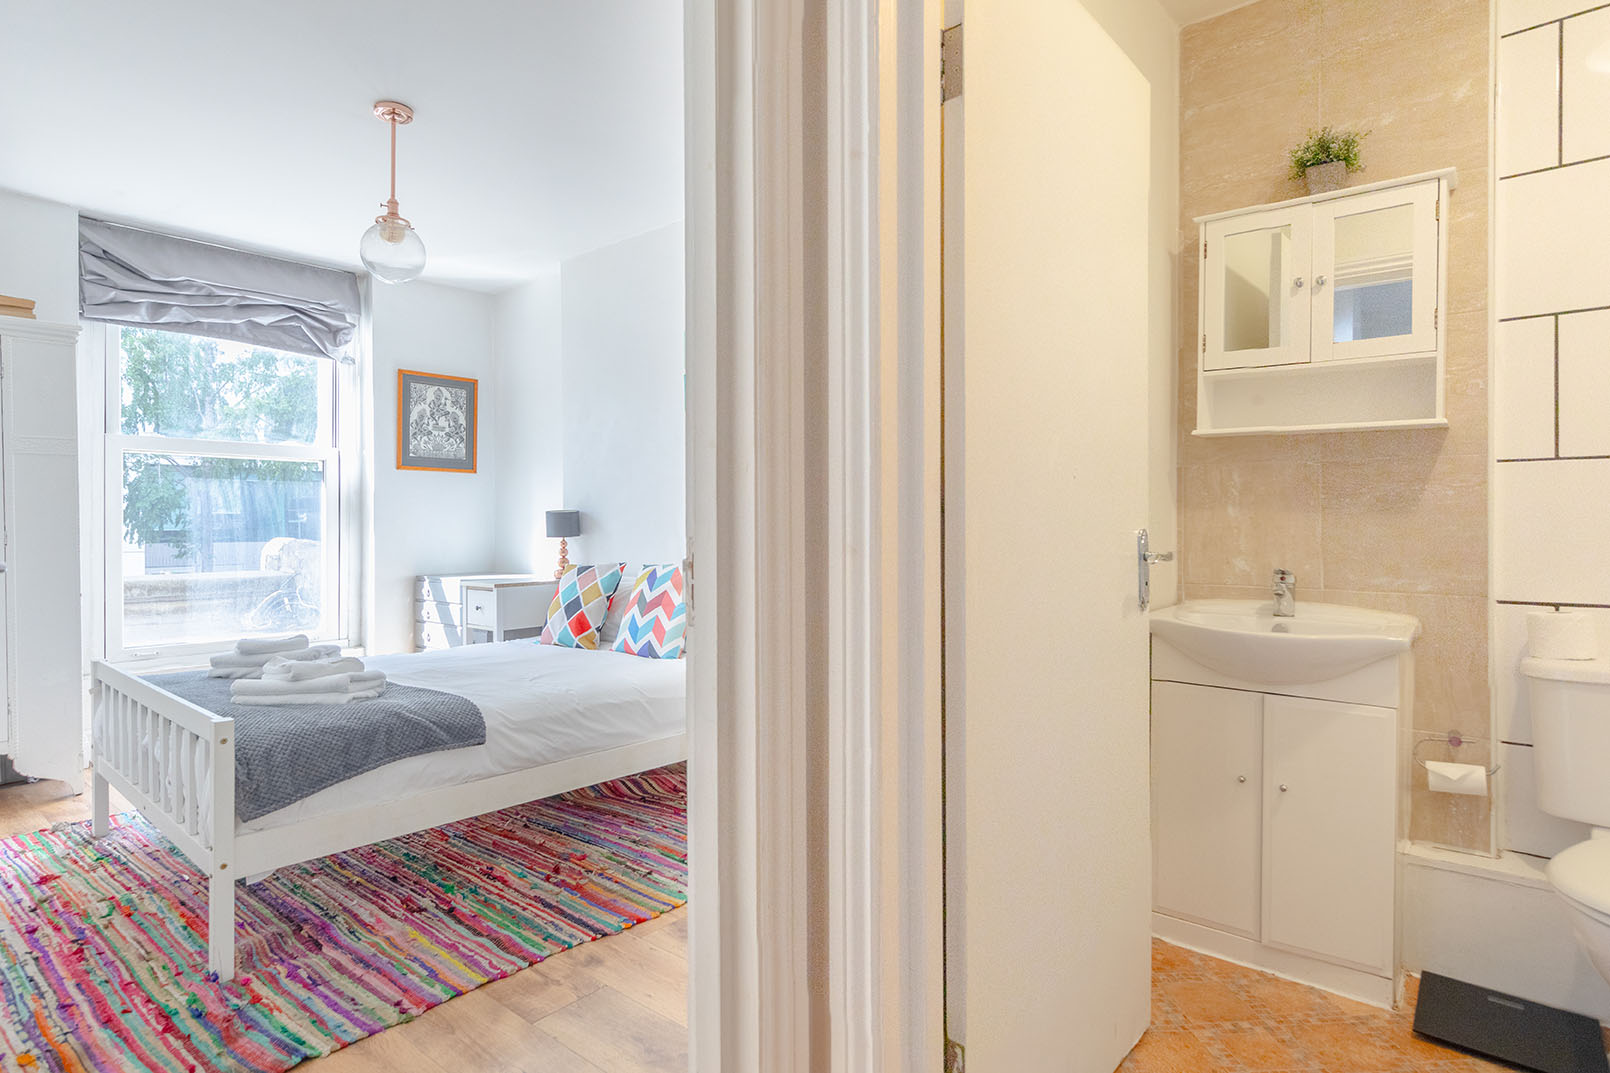 a combining property photography for a bedroom and showing its connection to the bathroom